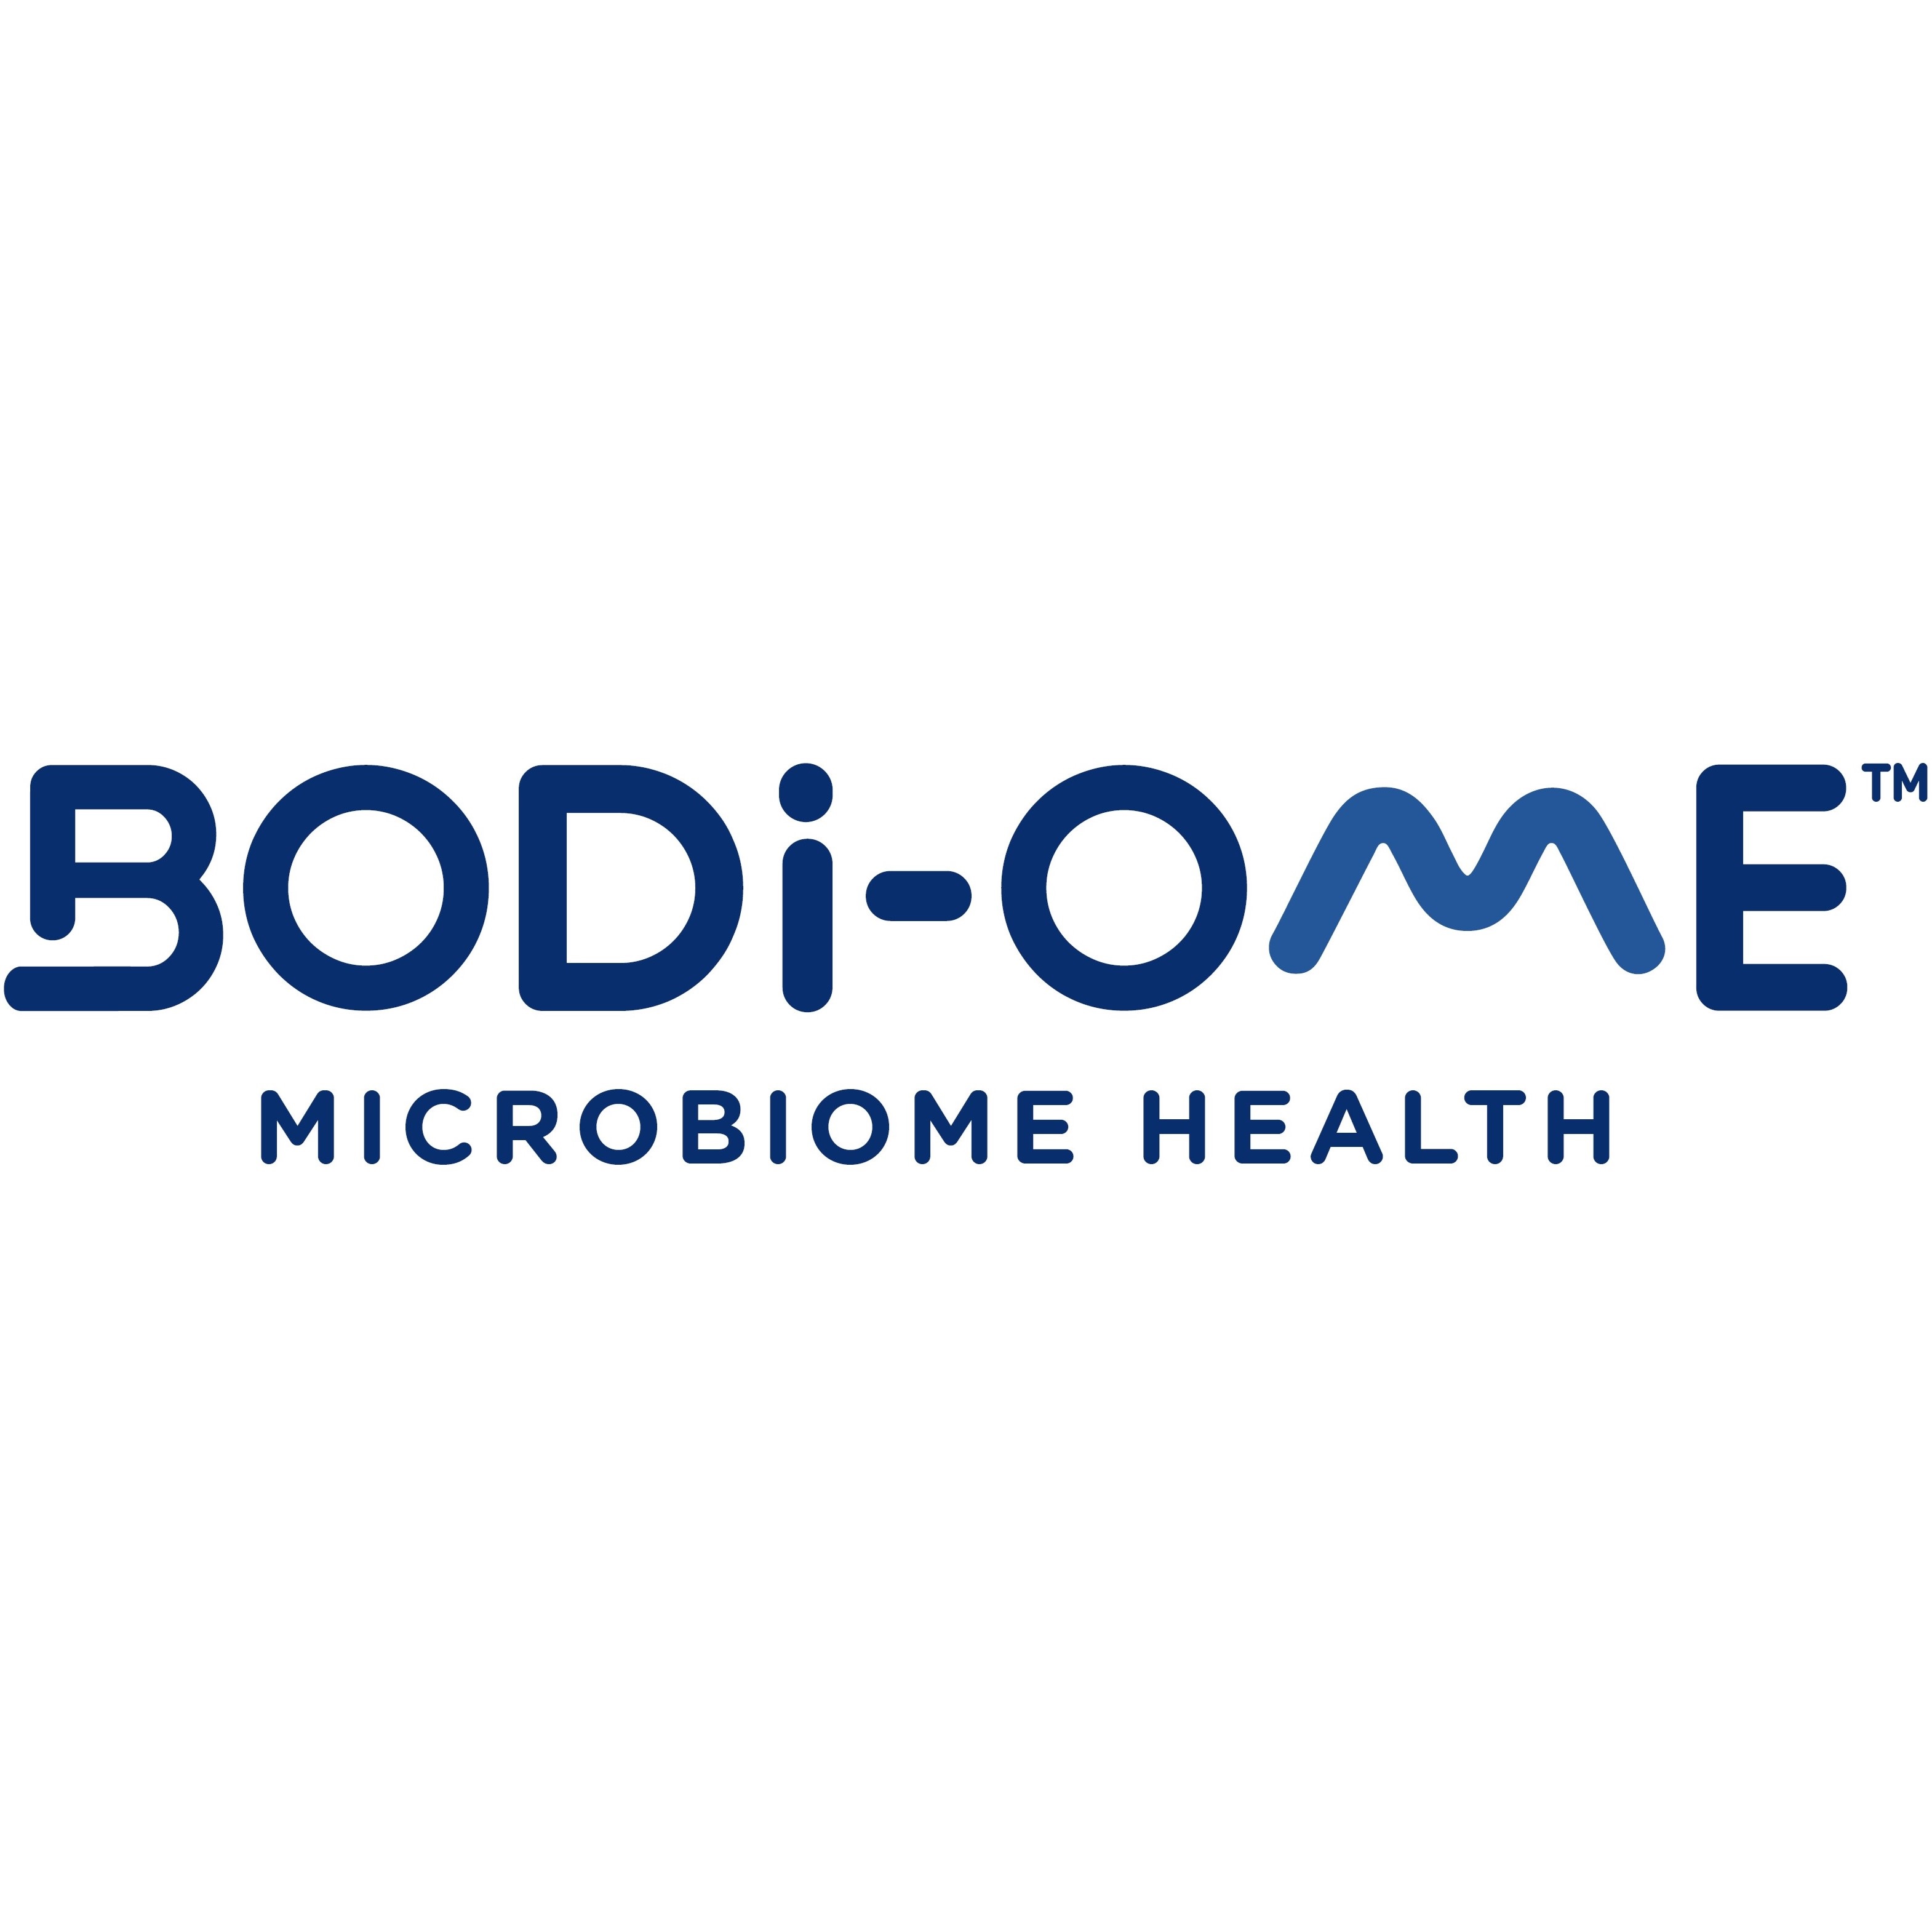 Feed Your Microbiome, Feed Your Possibilities